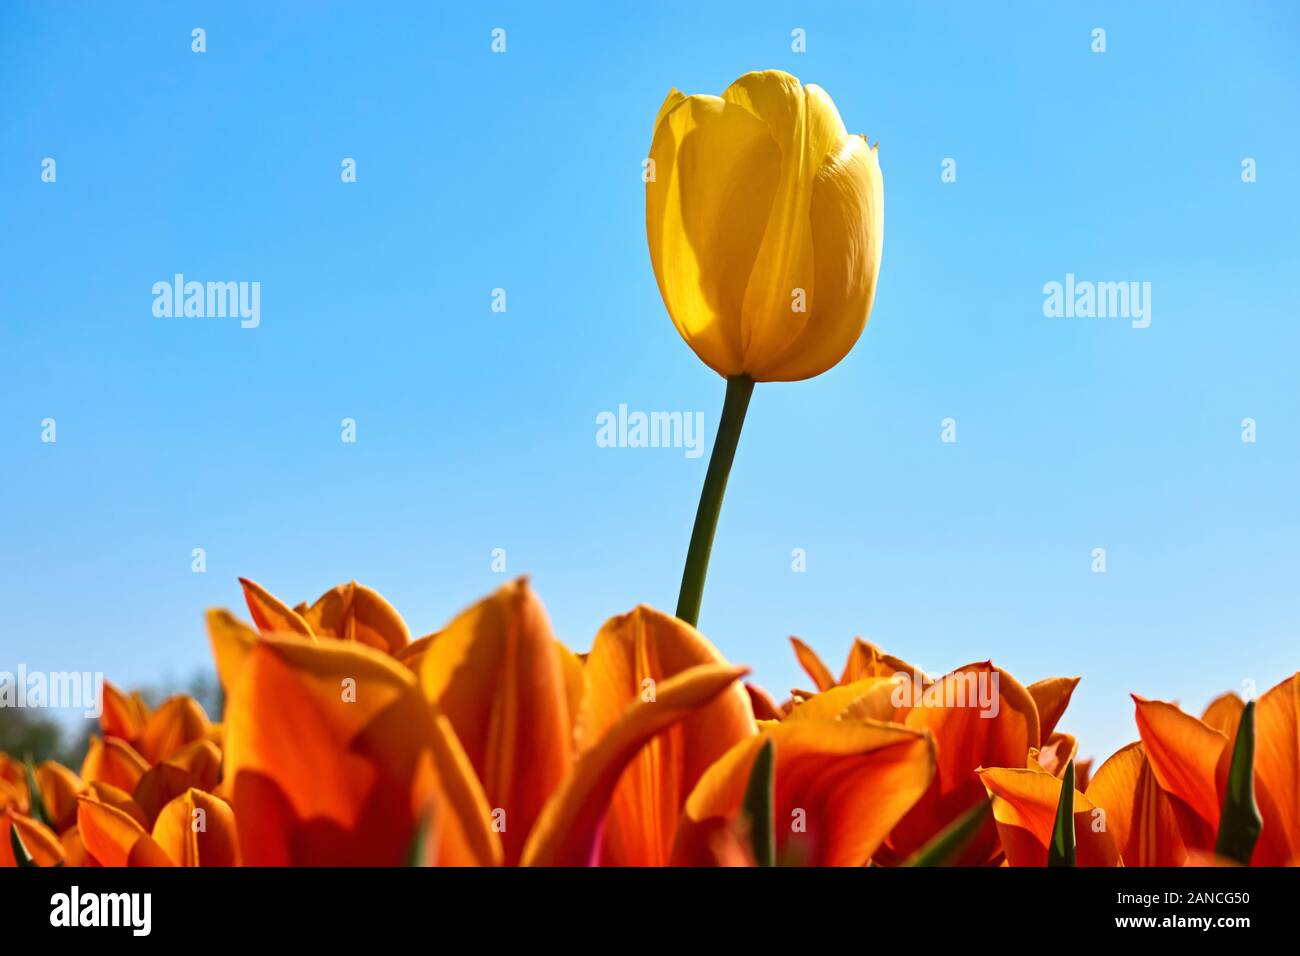 Individuality, difference and leadership concept. Stand out from the crowd. A single yellow tulip in a field with orange tulips against a blue sky. Stock Photo